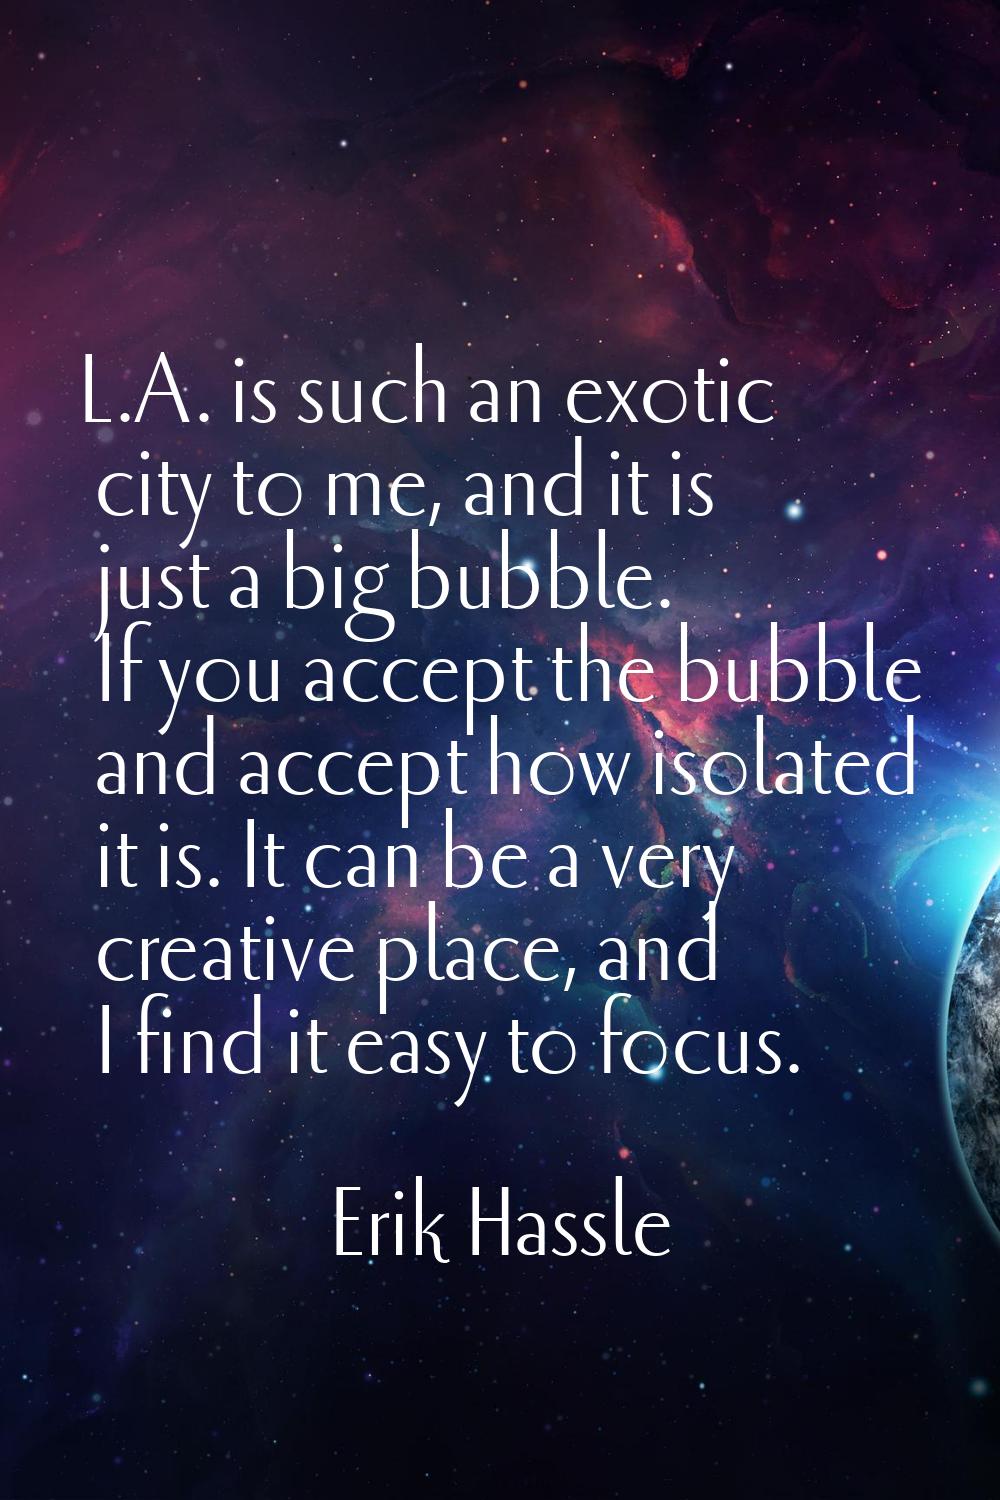 L.A. is such an exotic city to me, and it is just a big bubble. If you accept the bubble and accept